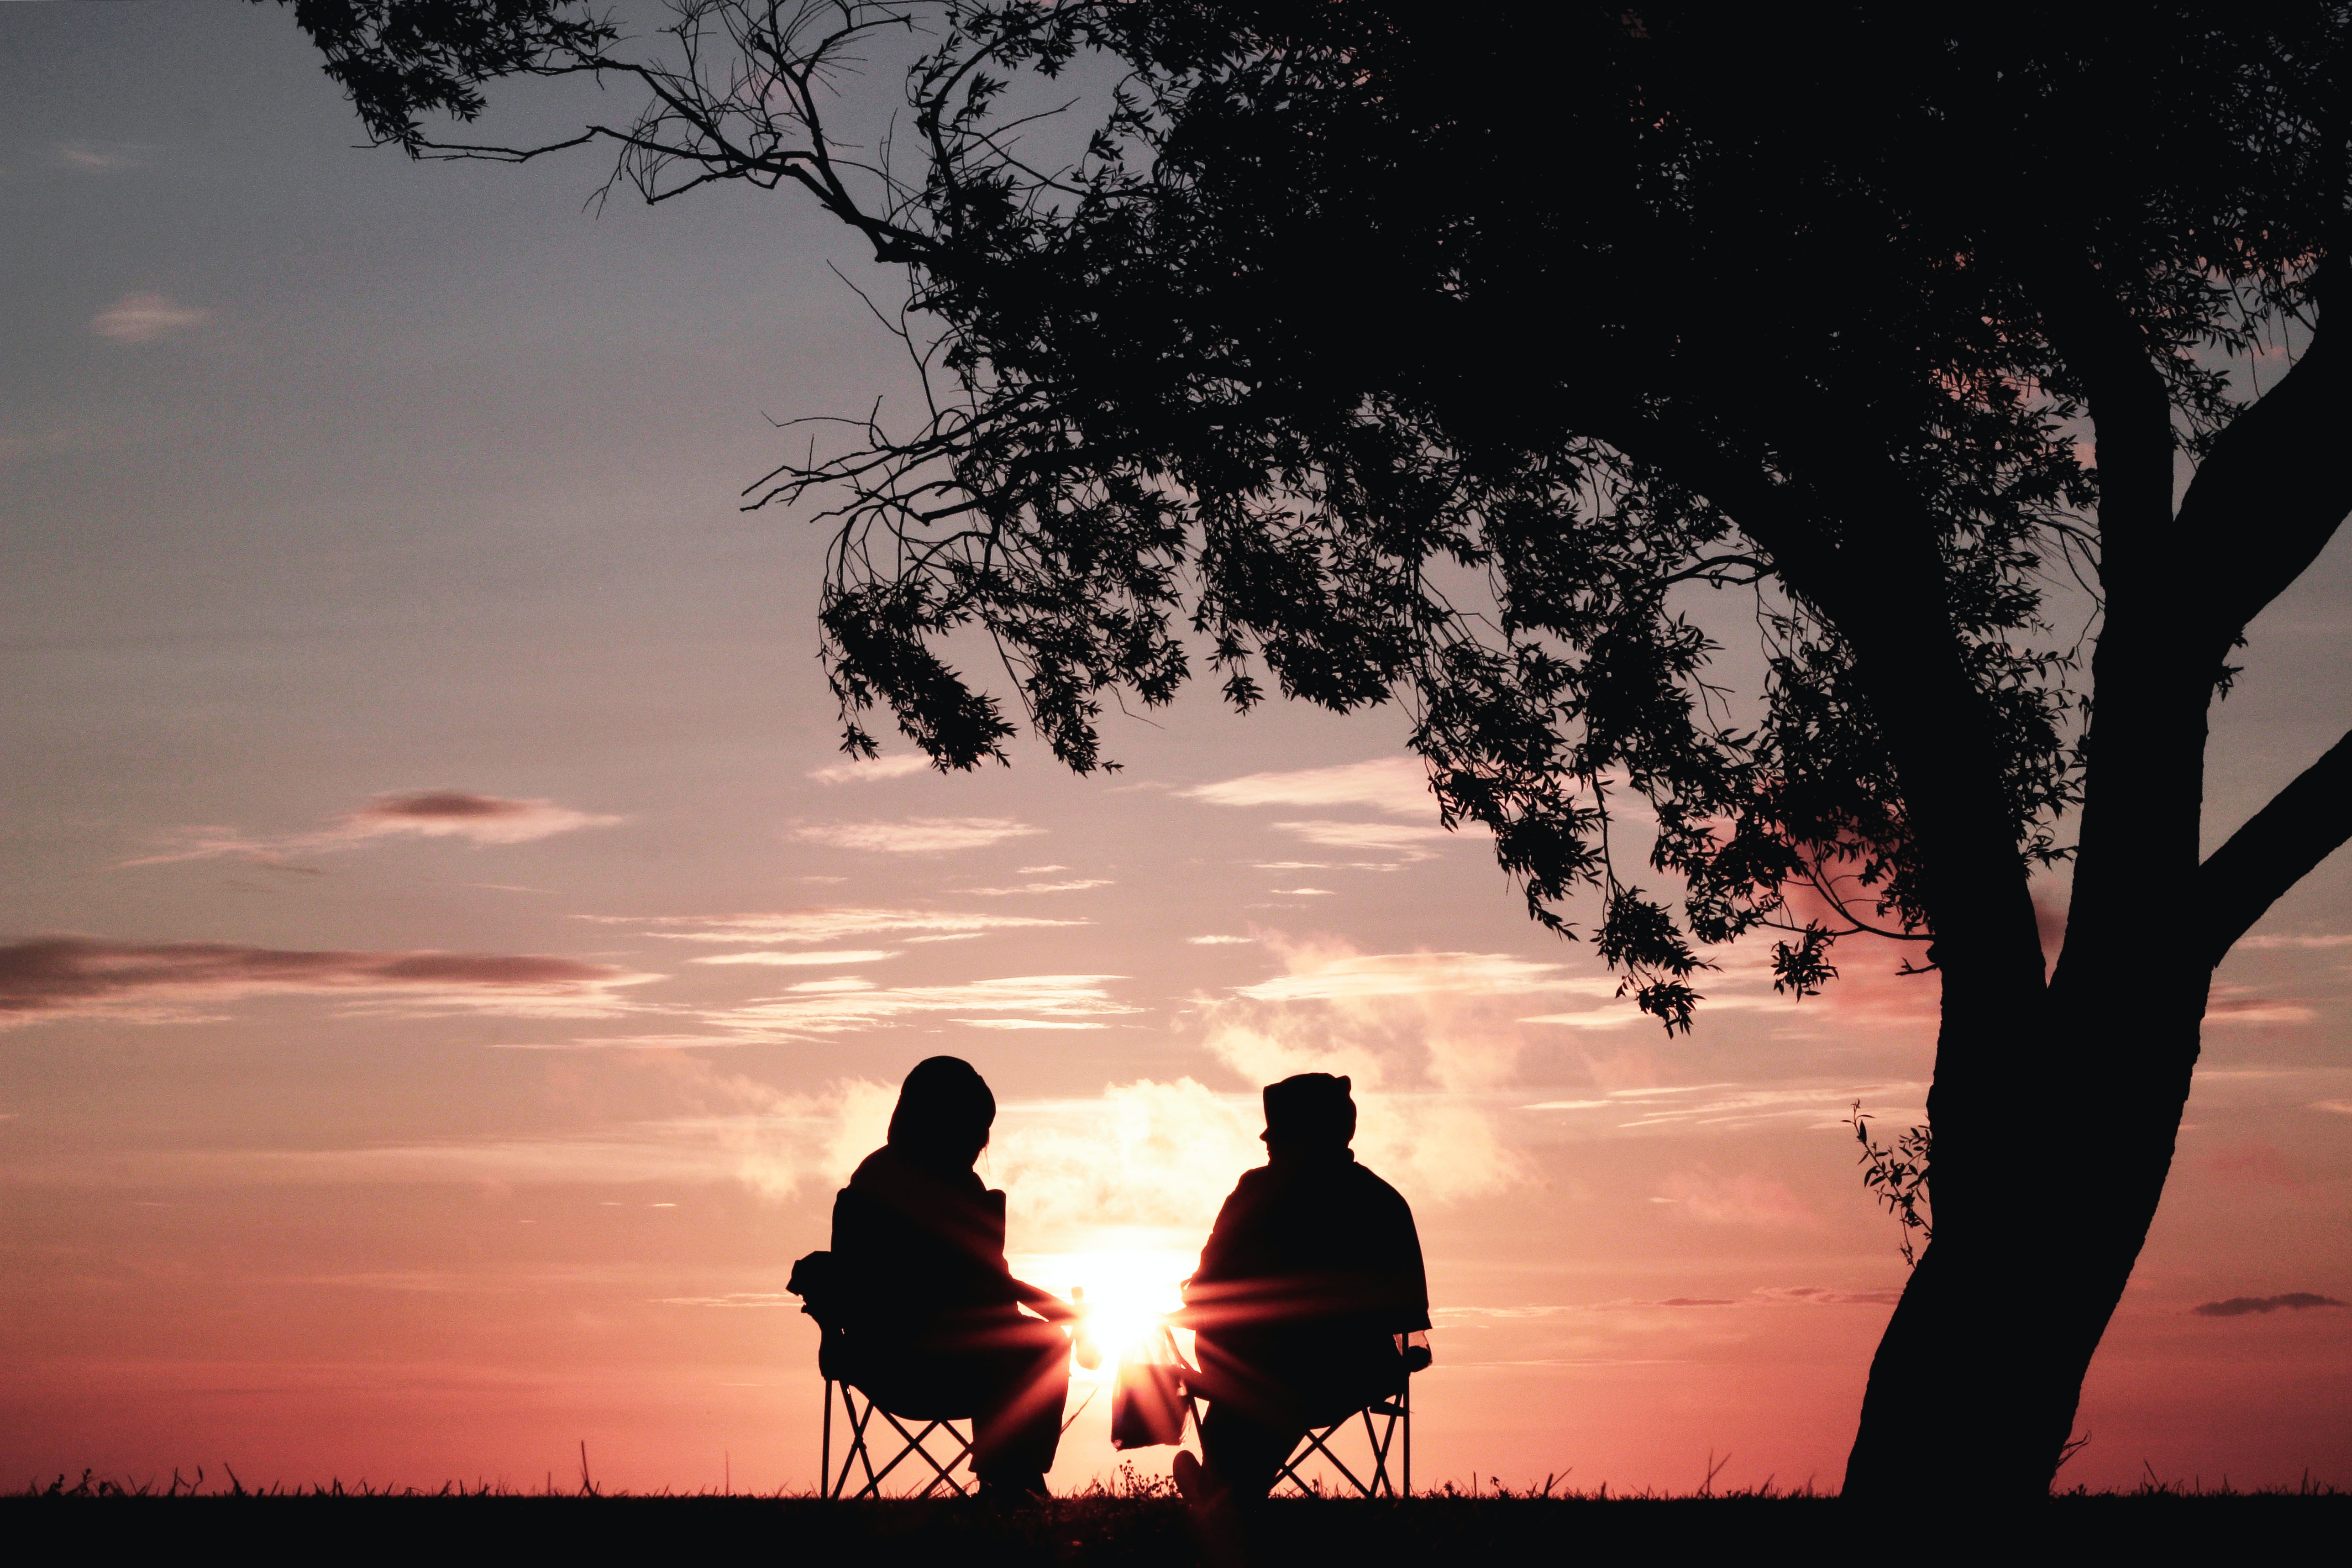 Two people sitting under a tree watching the sunset